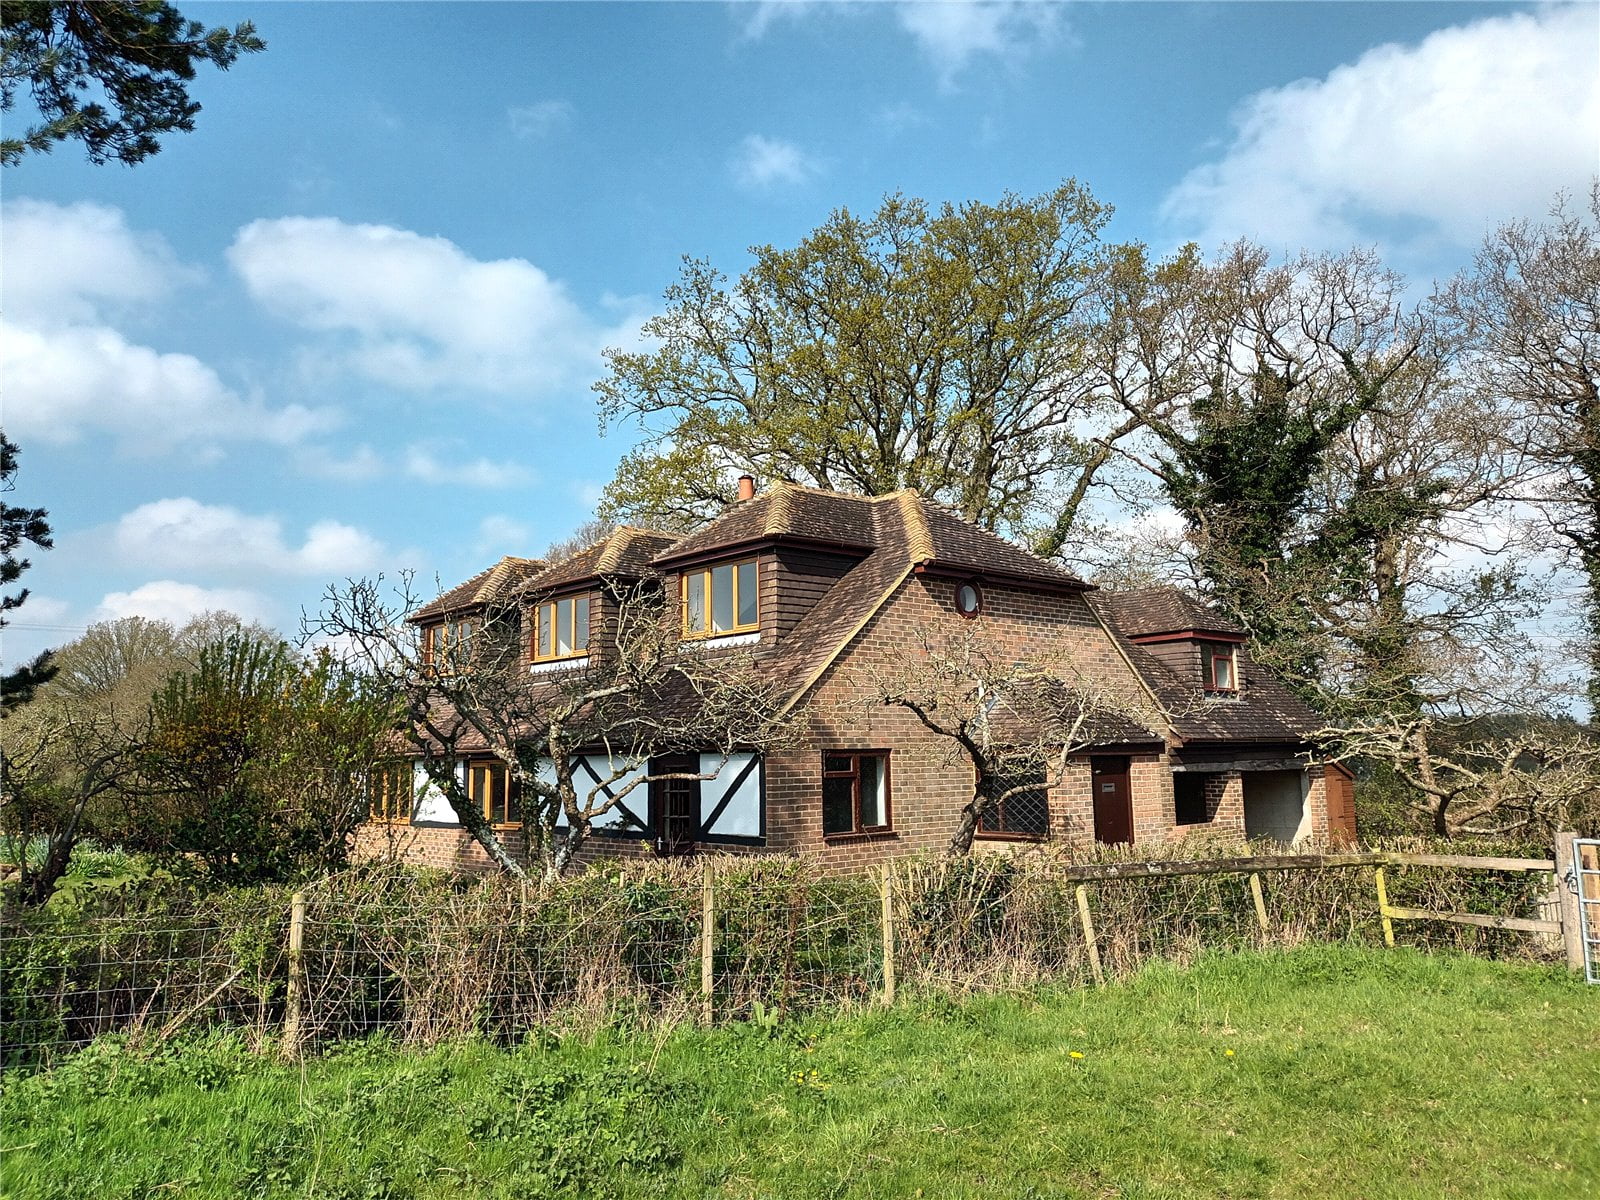 Nutbourne Lane, North Heath, Pulborough, West Sussex | residential-lettings